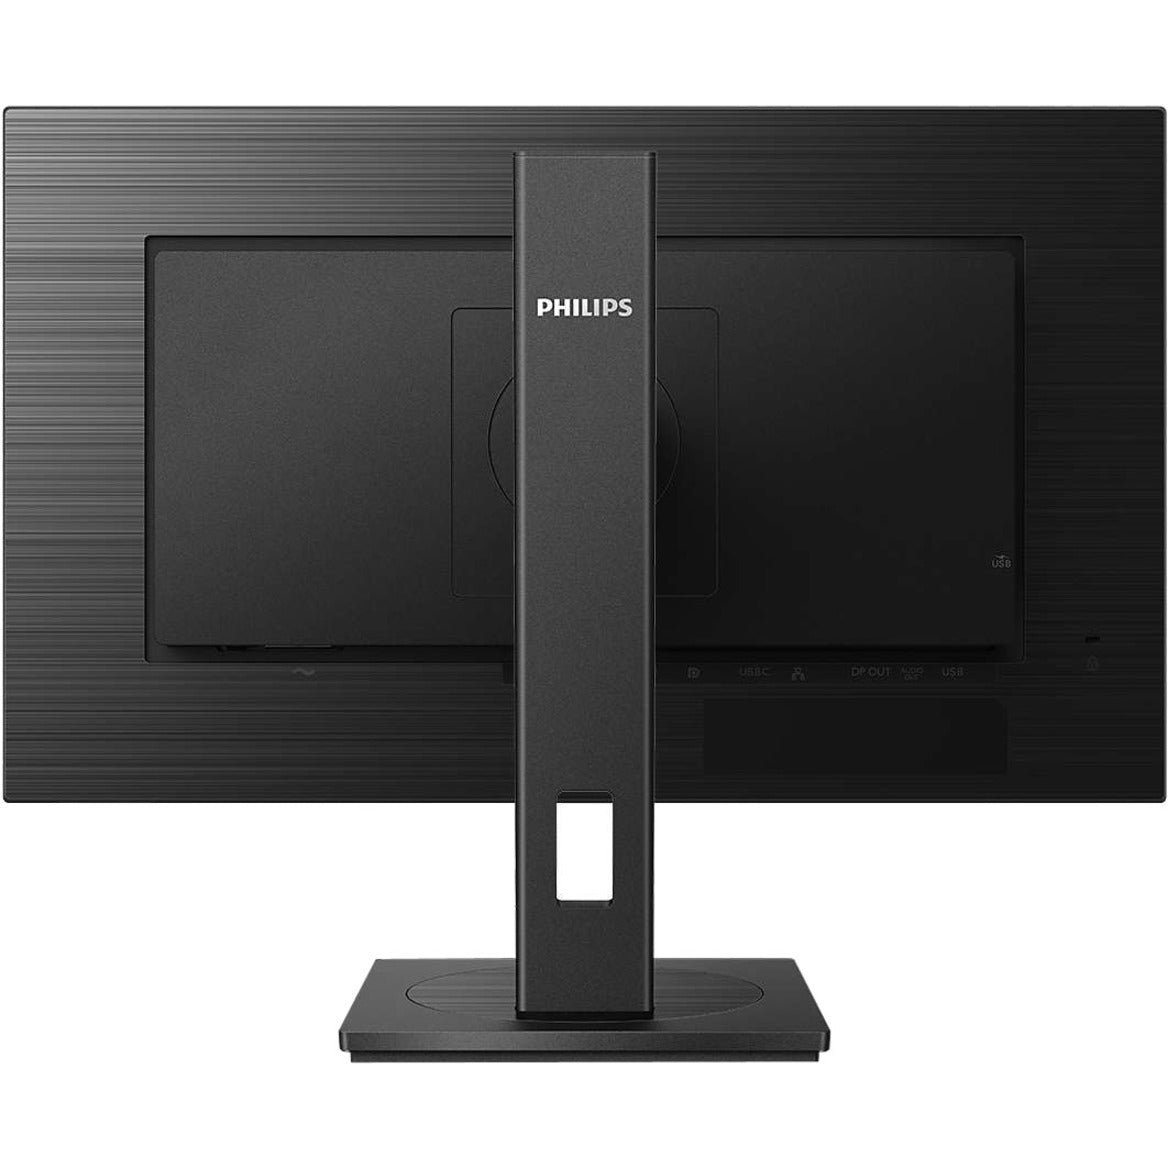 Philips 243B1 LCD Monitor with USB-C, 23.8" Full HD, Textured Black